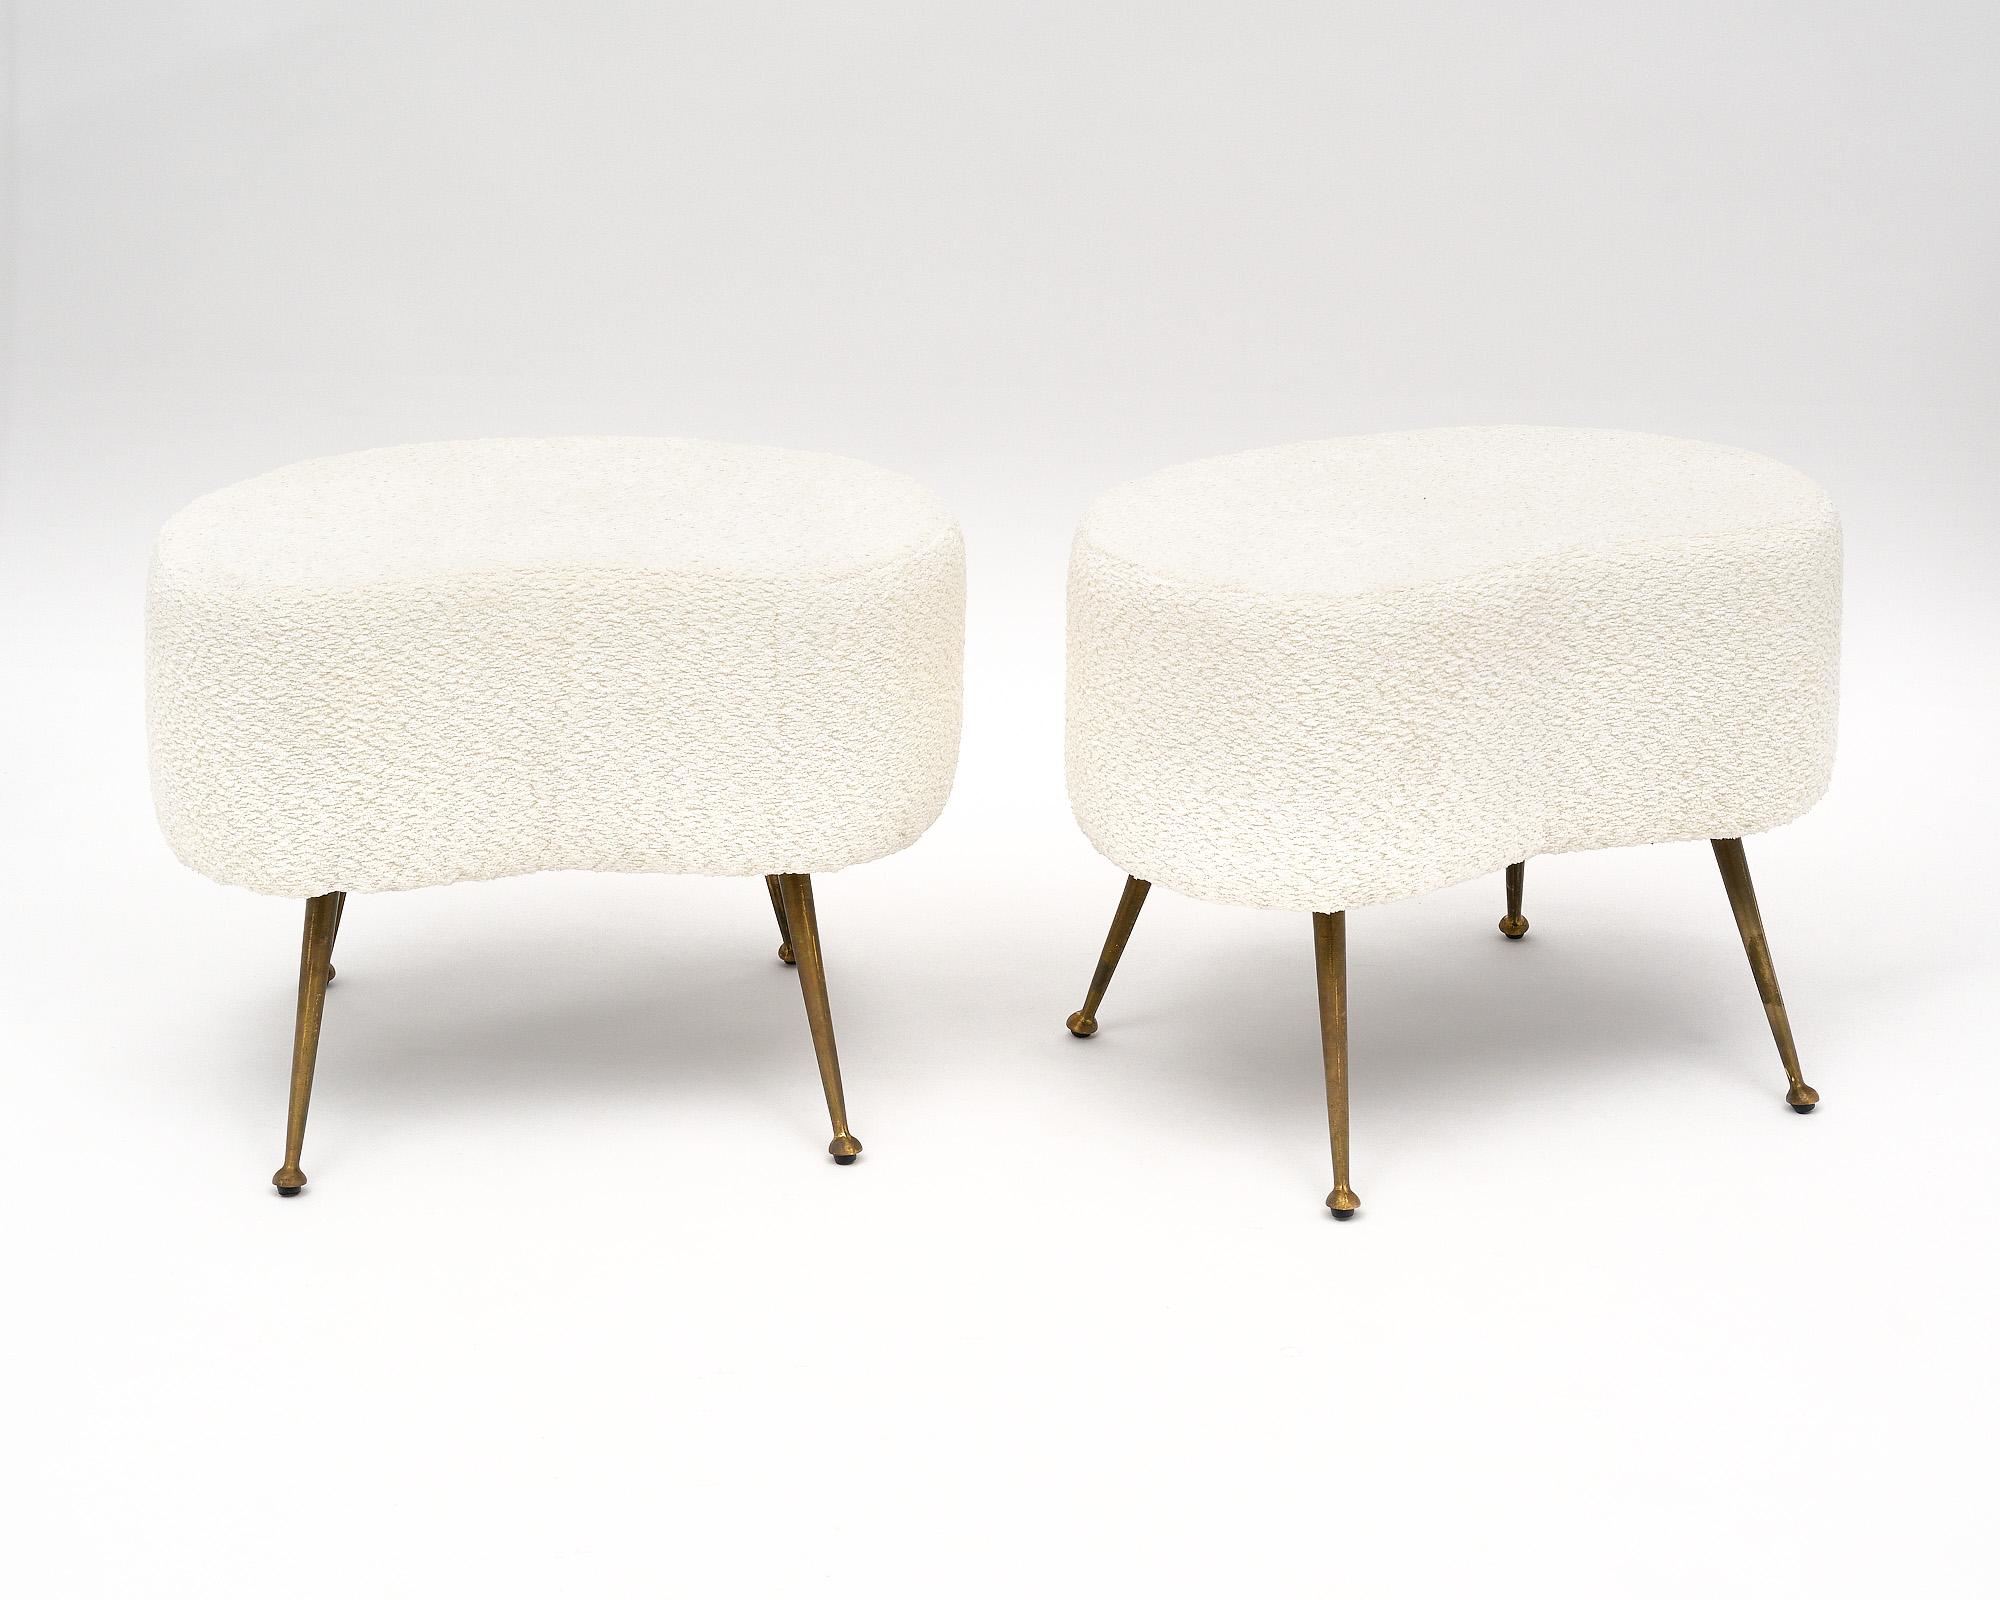 Pair of Italian vintage benches or stools with flaring brass legs. We love the quirky shape of the seats and the striking lines of the mid-century design. They have been newly upholstered in a wool blend boucle fabric in a white color.
